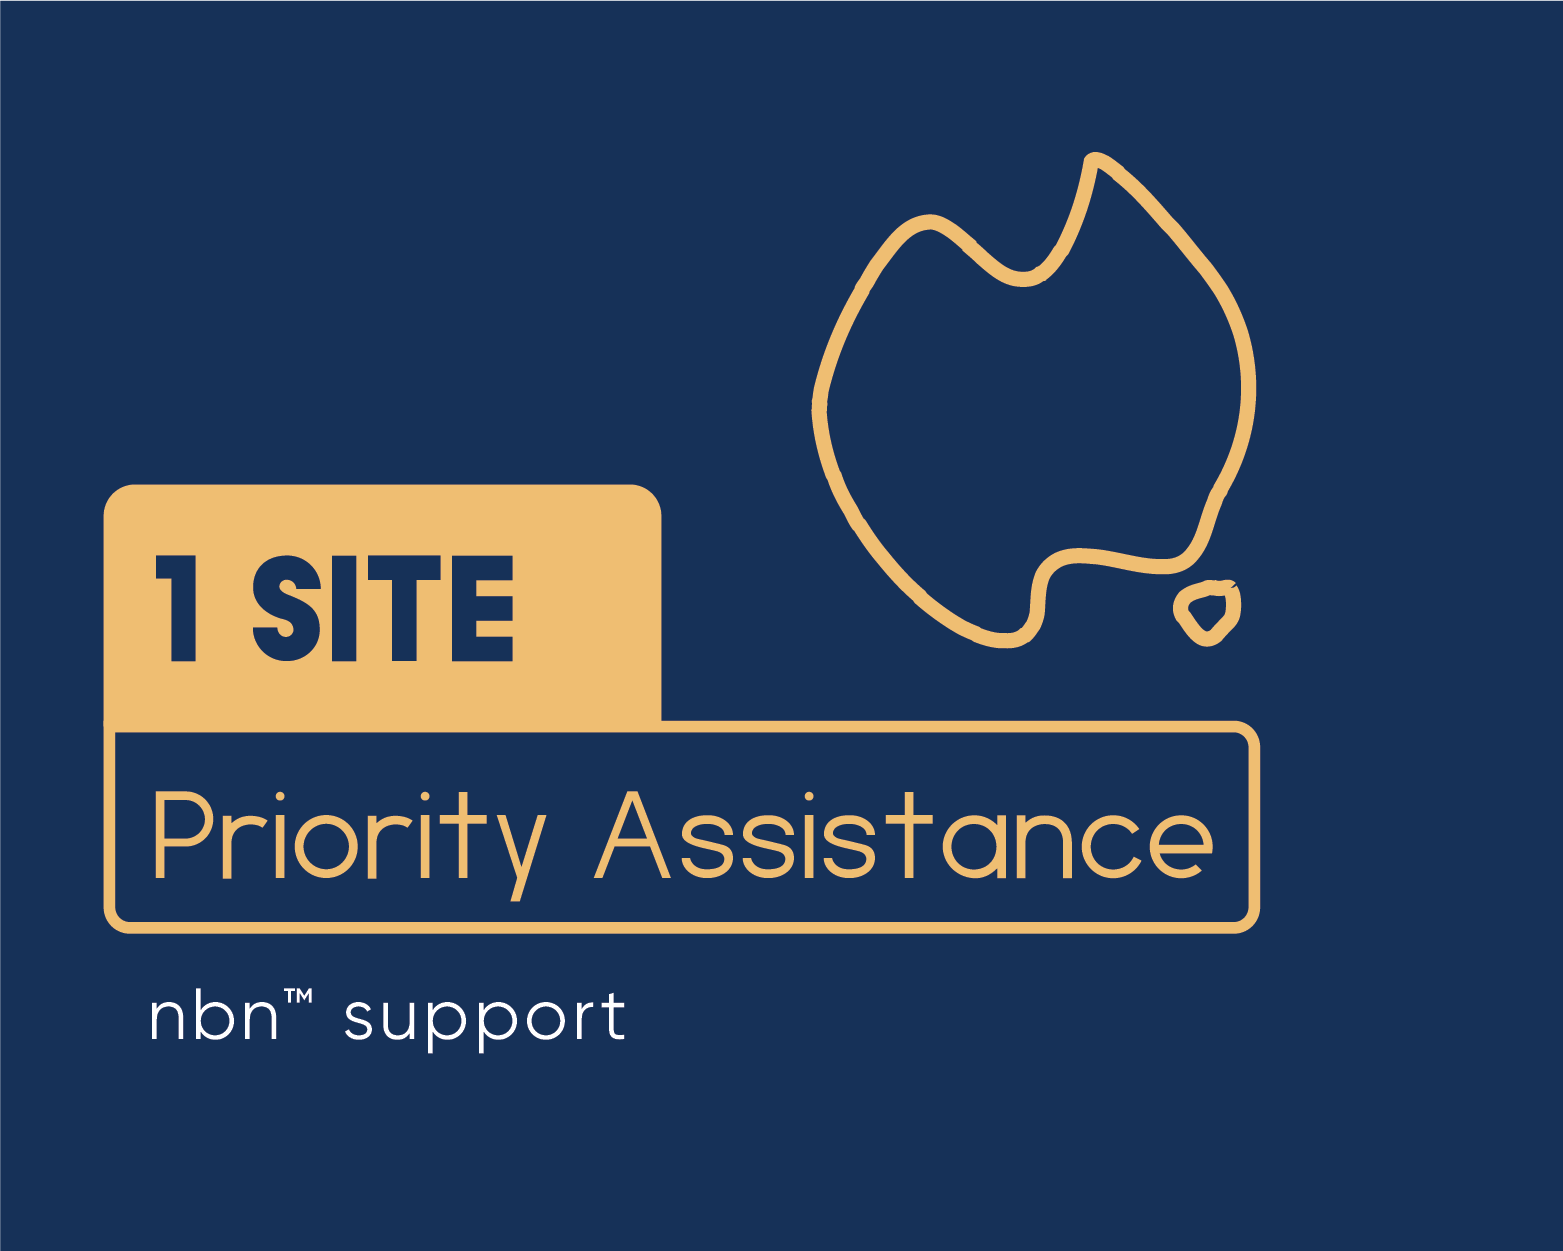 1 site priority assistance